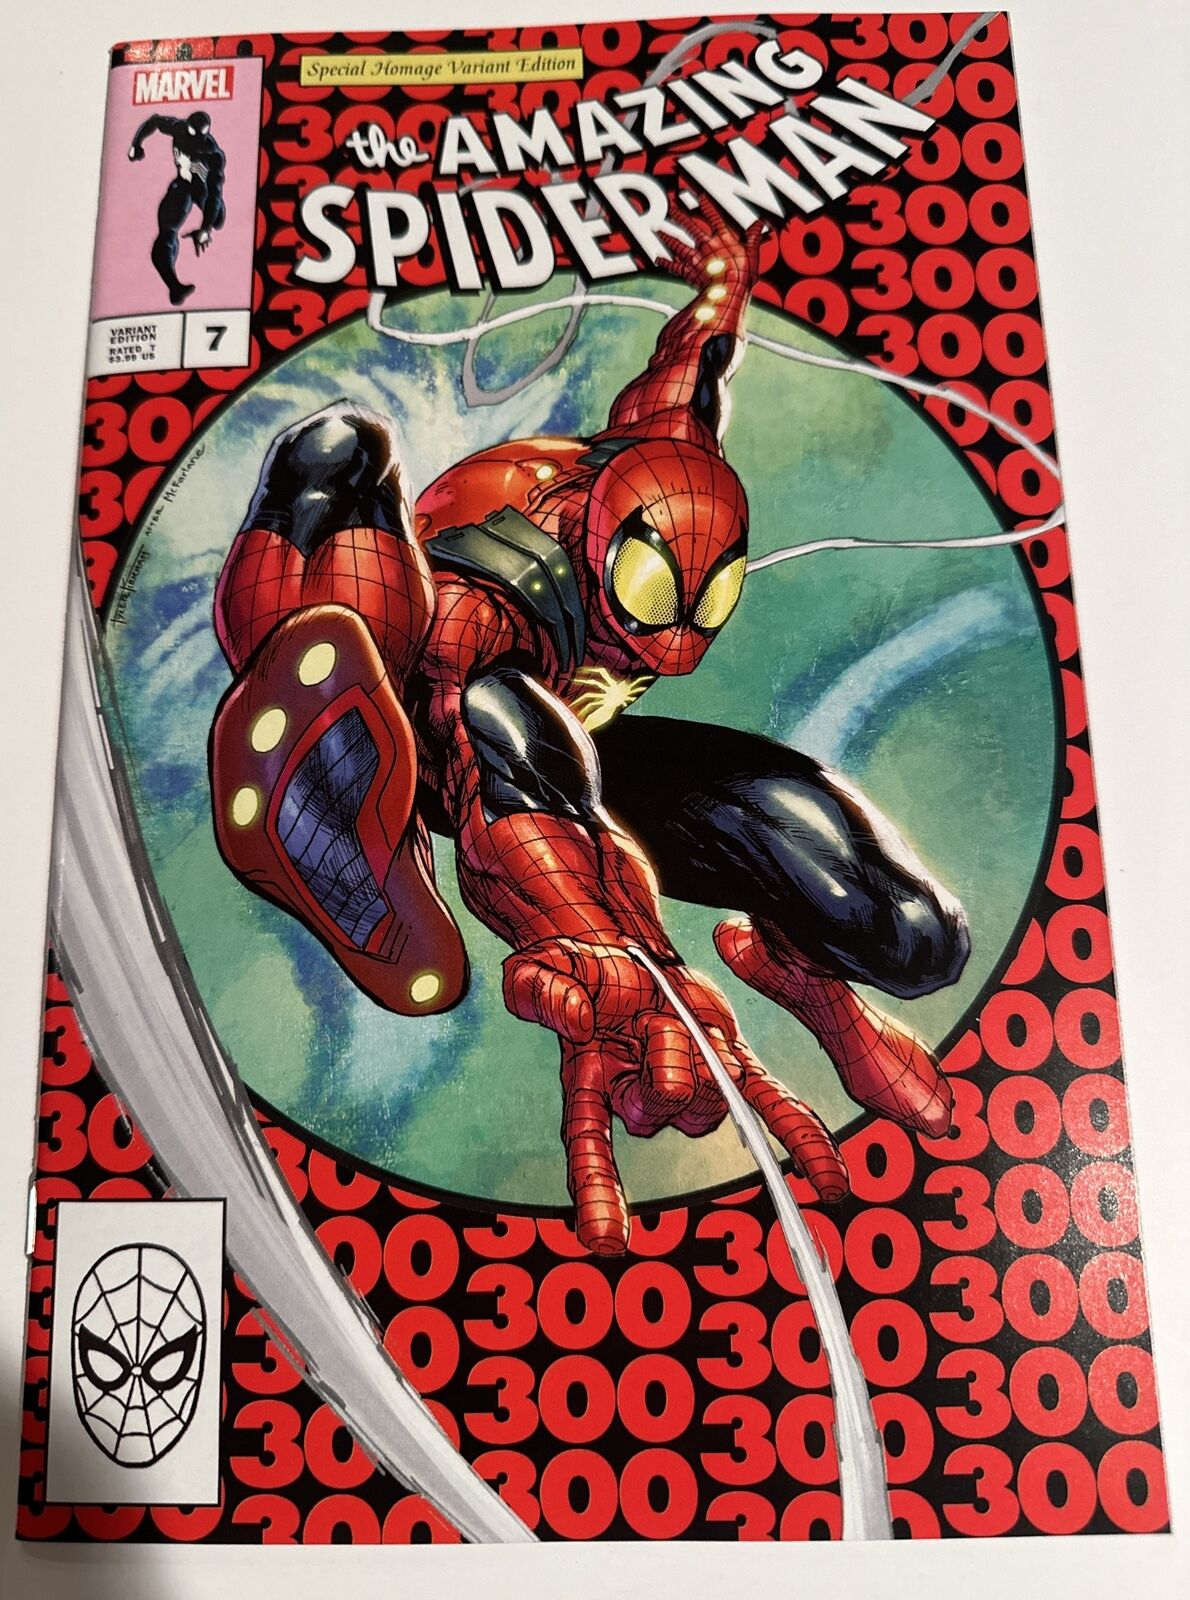 Amazing Spider-Man Vol. 6 #7 Tyler Kirkham exclusive variant cover NM/NM+